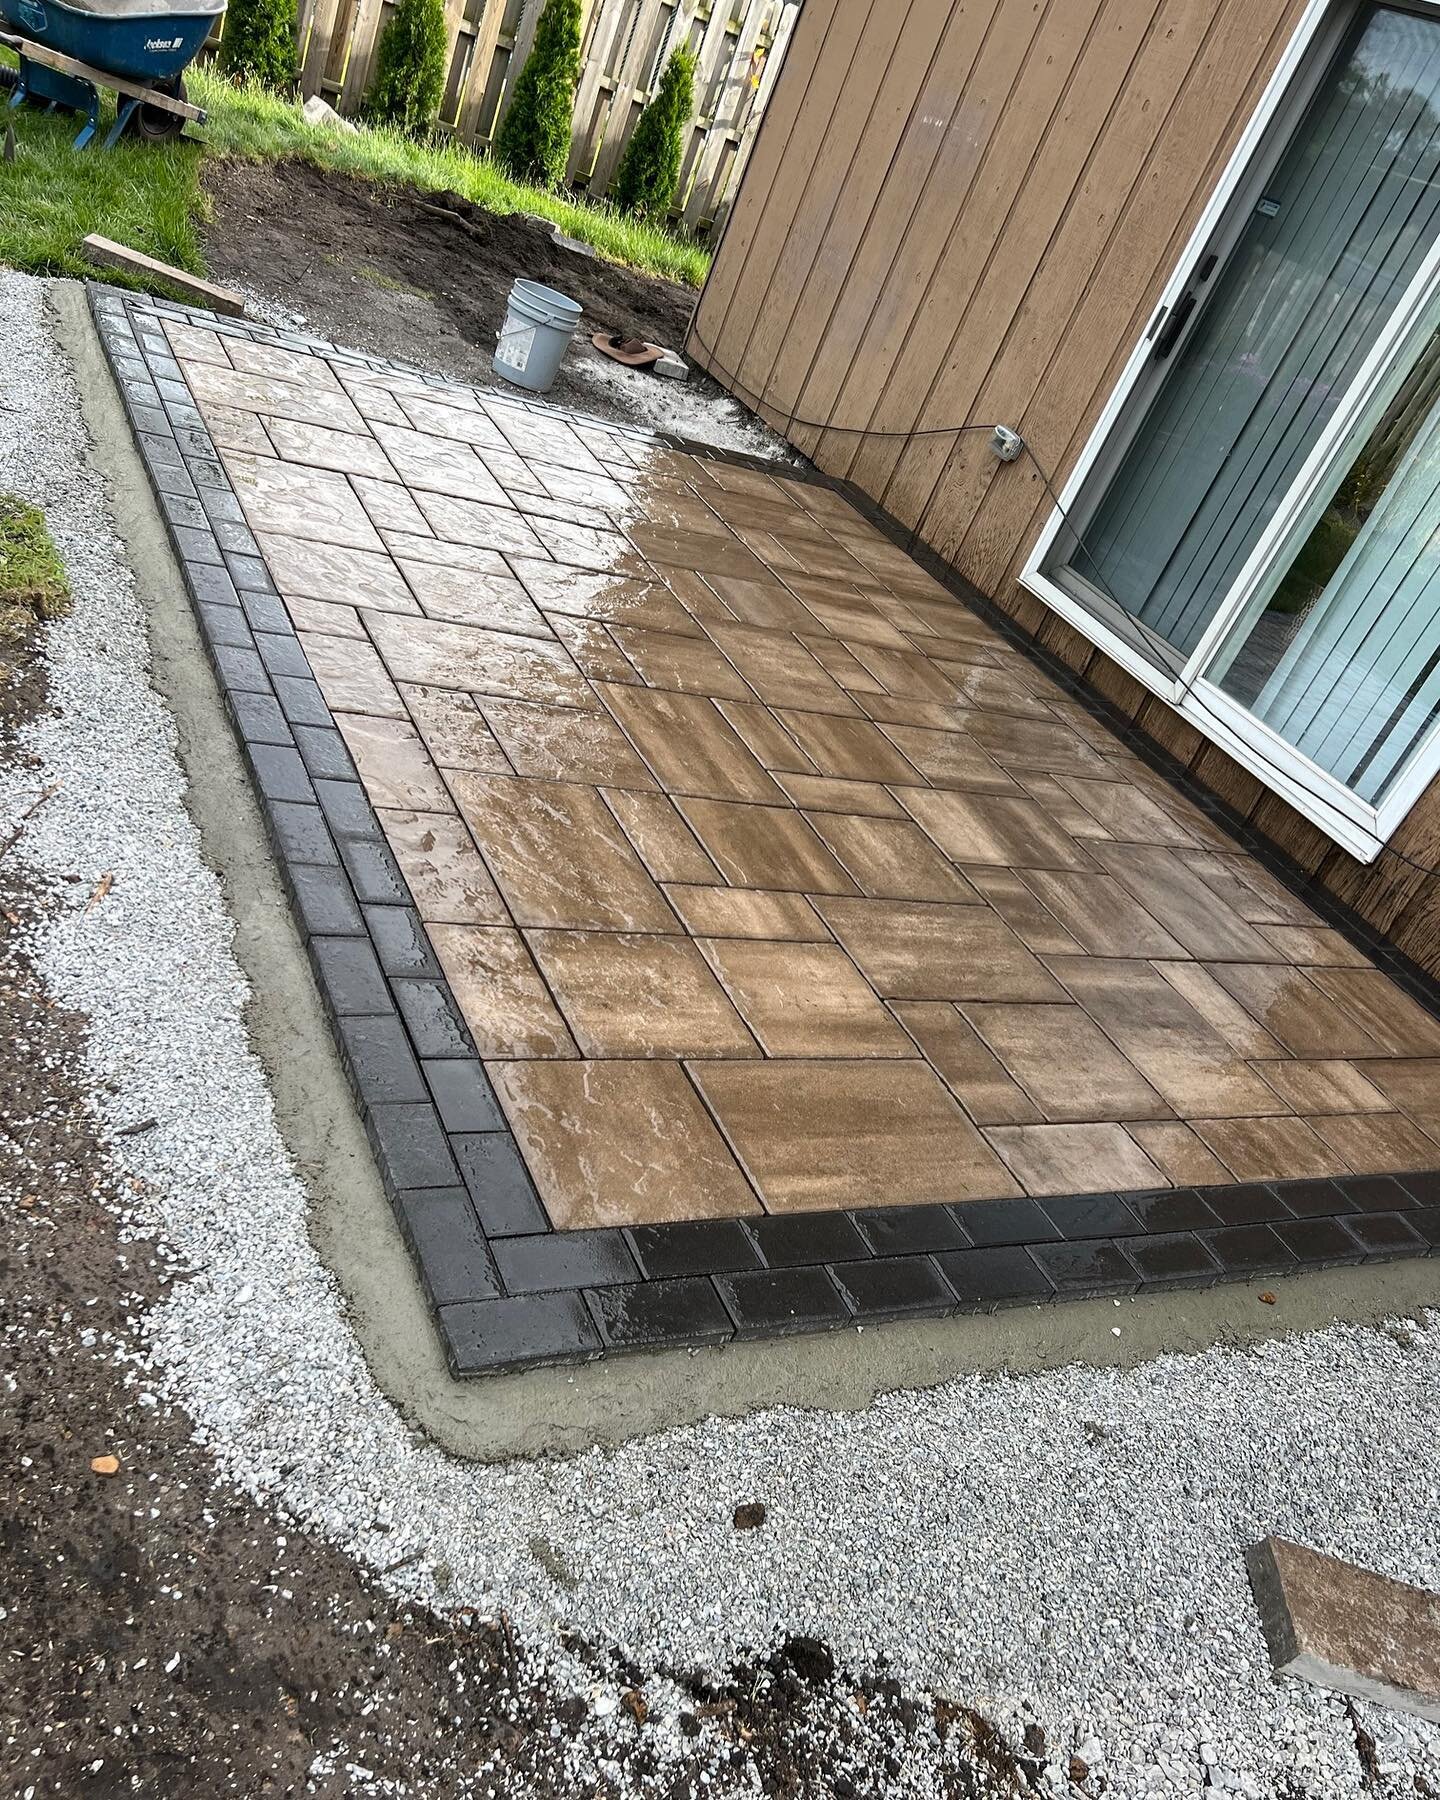 Paver patio with pea-gravel/stepping stone walkway complete! We used Oakwood Unilock Beacon Hill for the patio wrapped in a Charcoal Hollandstone soldier course. Contact us for your outdoor living projects! 708-527-1707